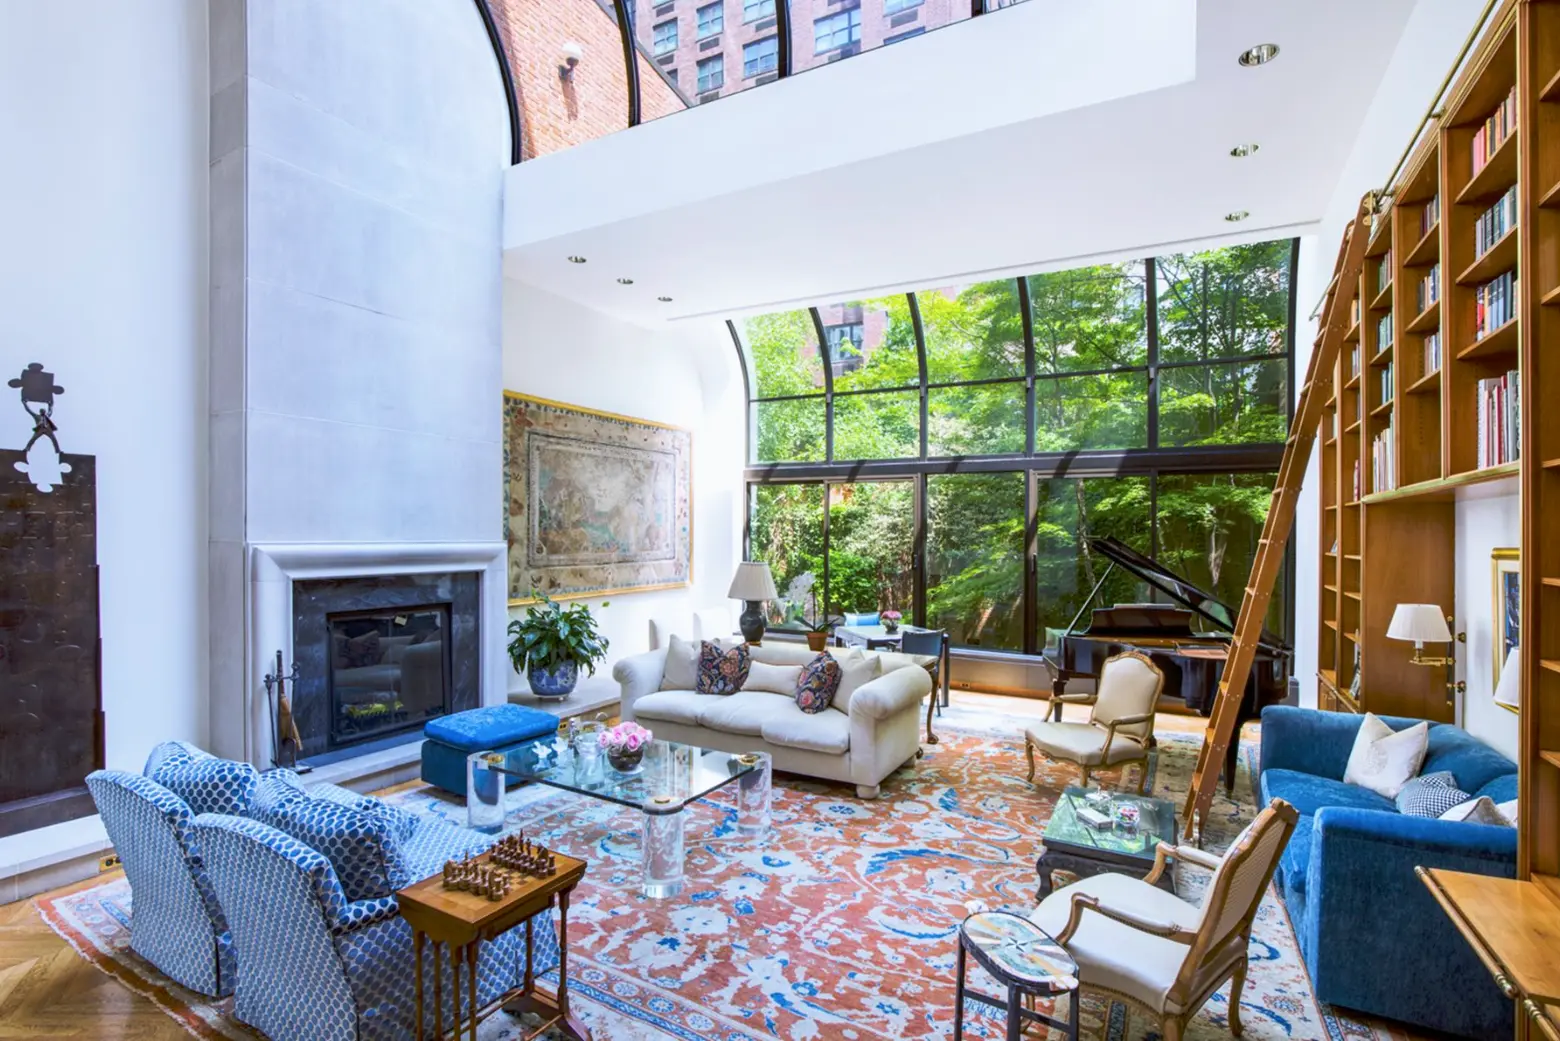 $13.5M UES mansion has a glass elevator, a 50-foot-wide garden, and two floors of the mansion next door